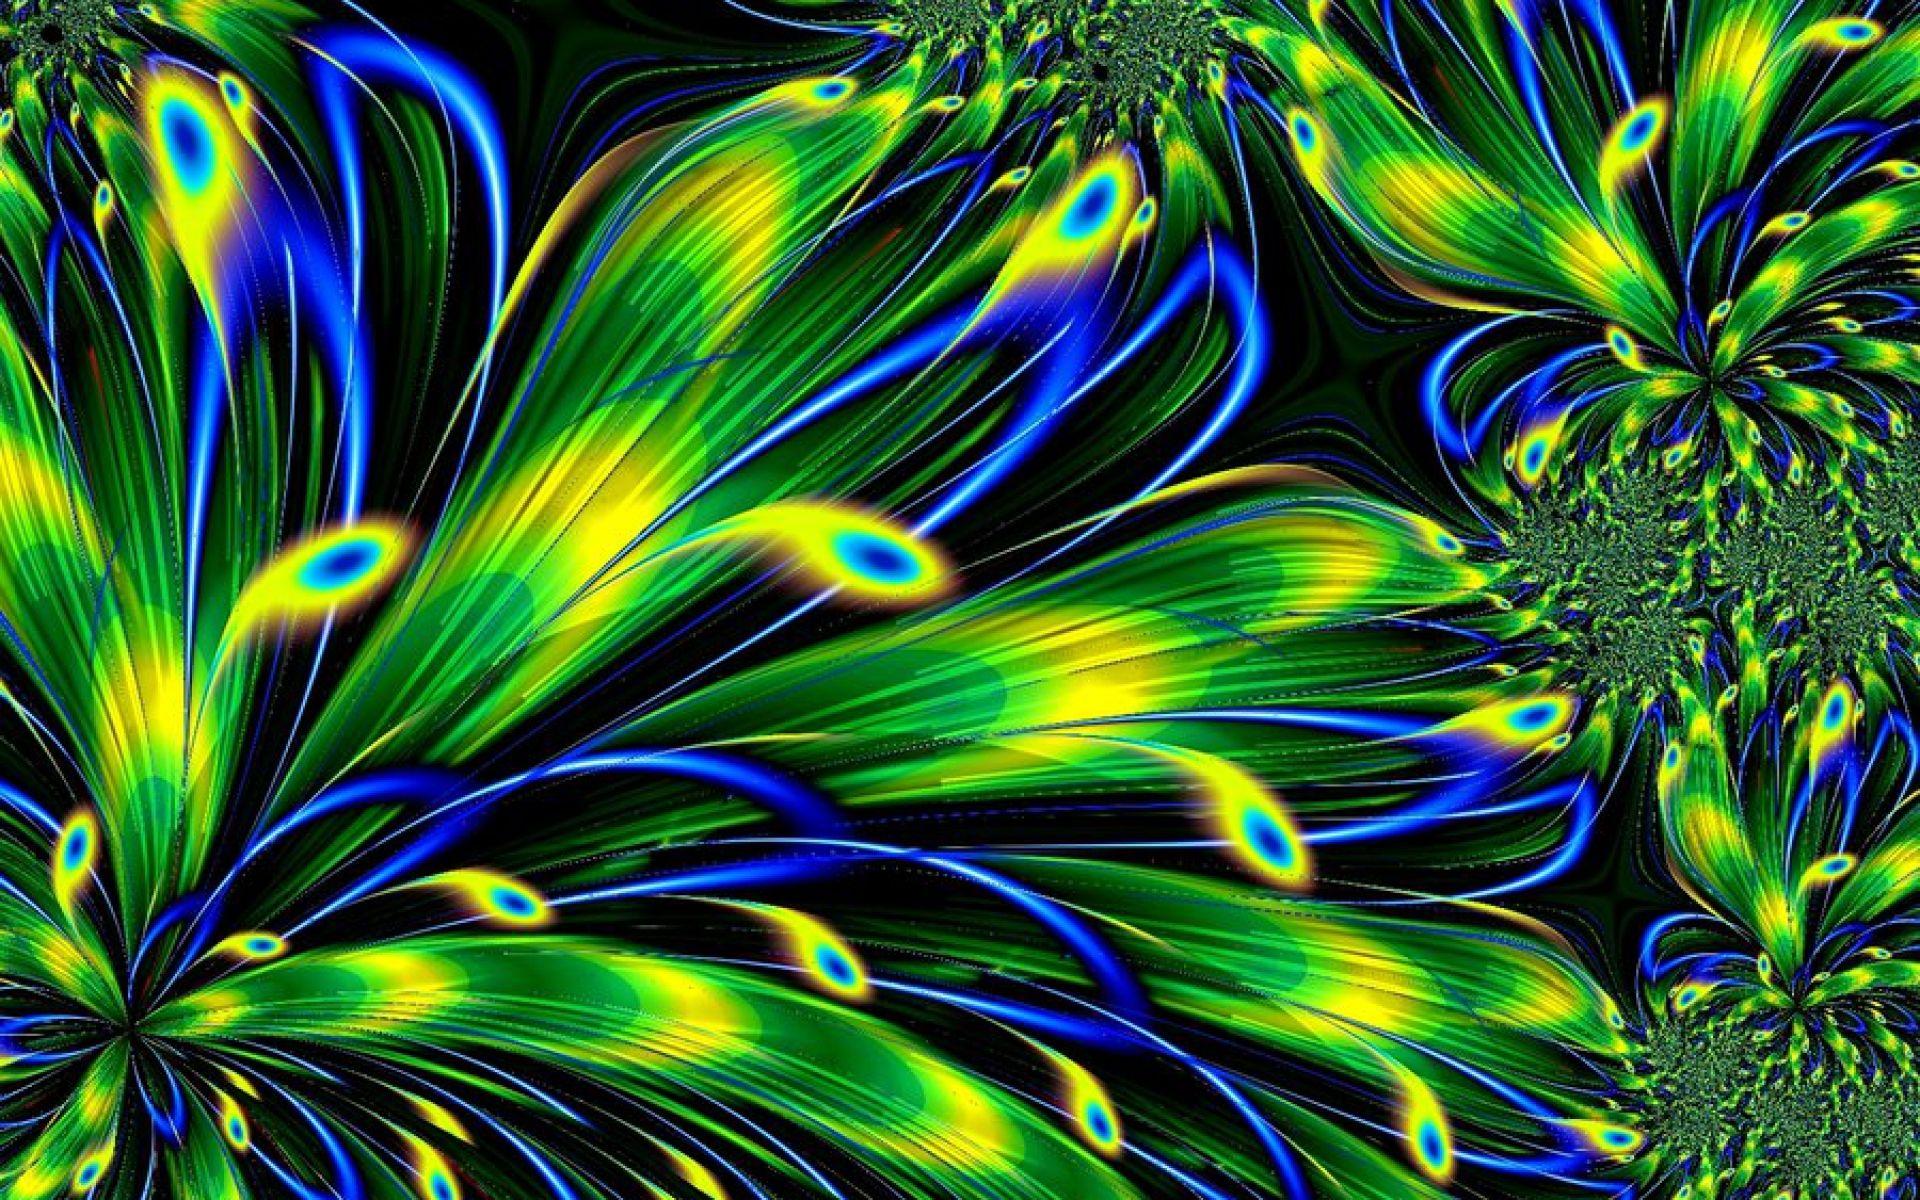 Abstract Peacock Feathers Full HD Wallpaper